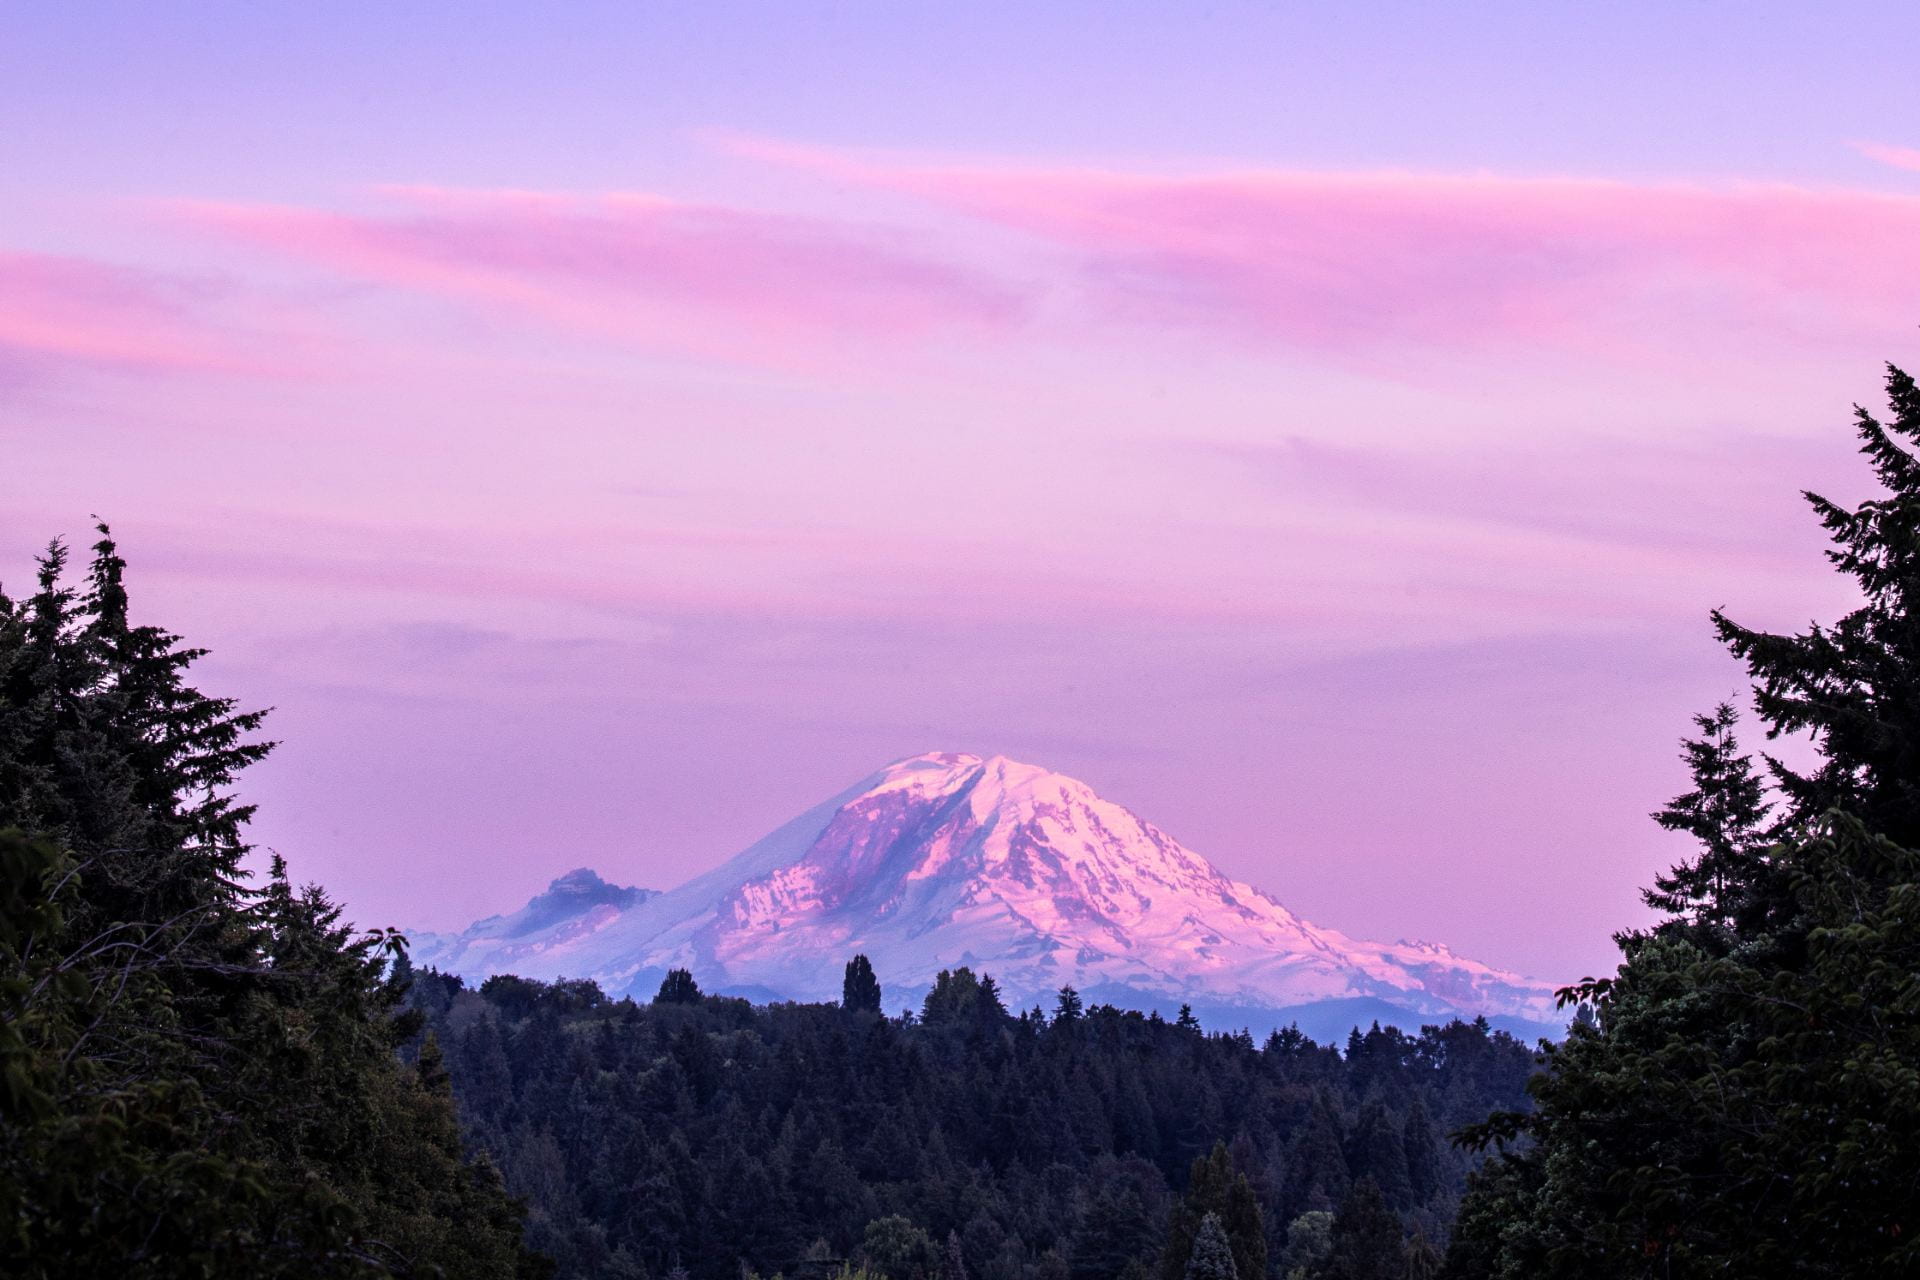 Mount Rainier (Tahoma) at sunset, looking south from UW Seattle.